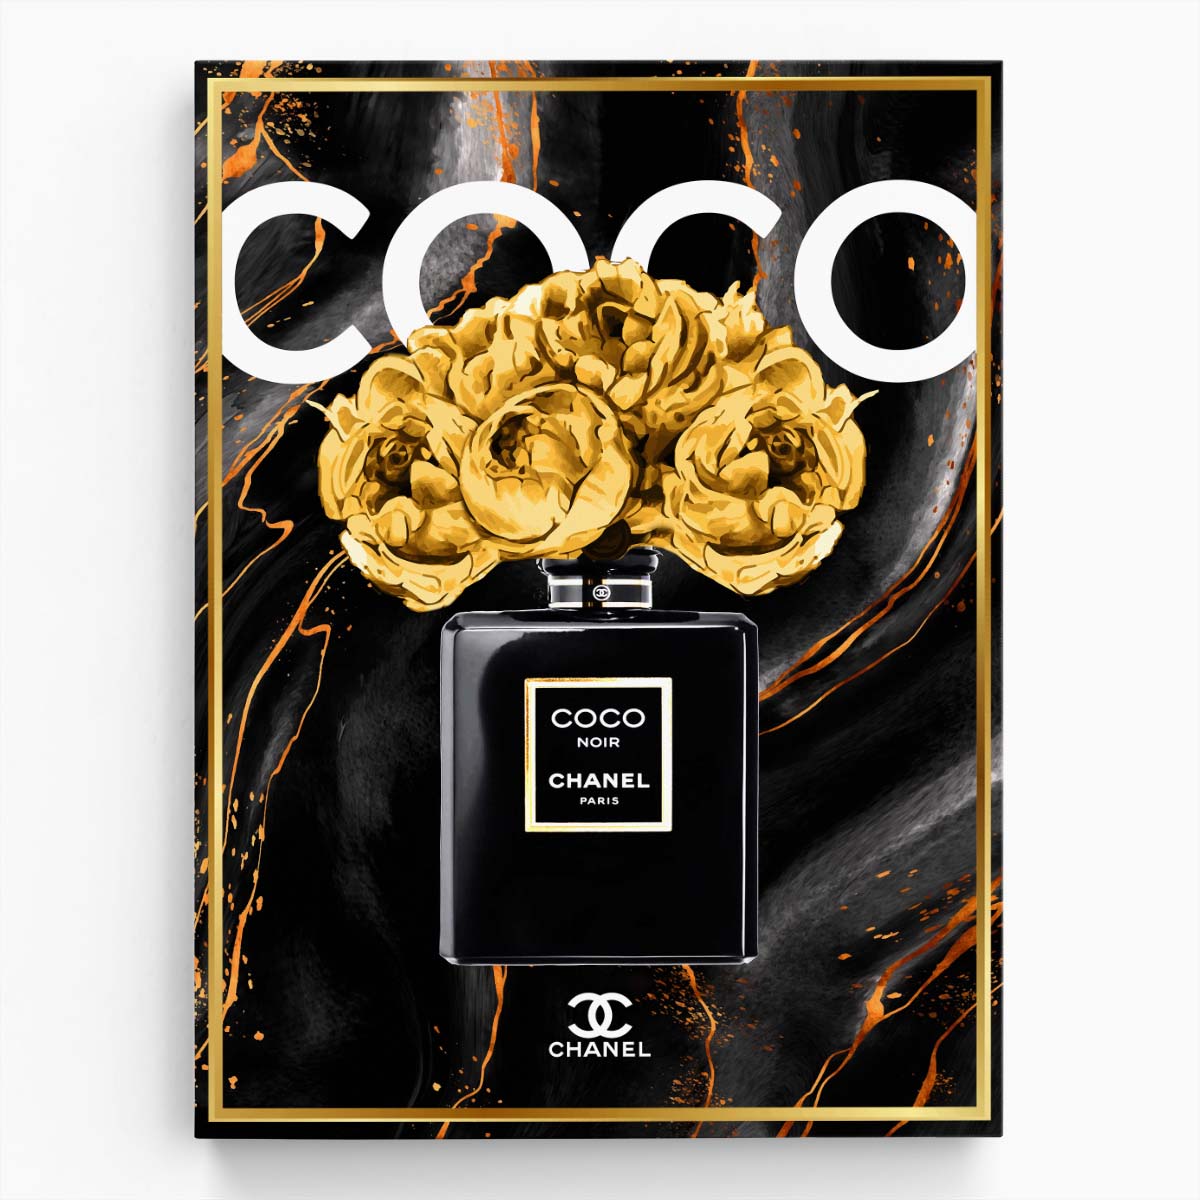 Coco Chanel Noir Perfume Black Marble Wall Art by Luxuriance Designs. Made in USA.